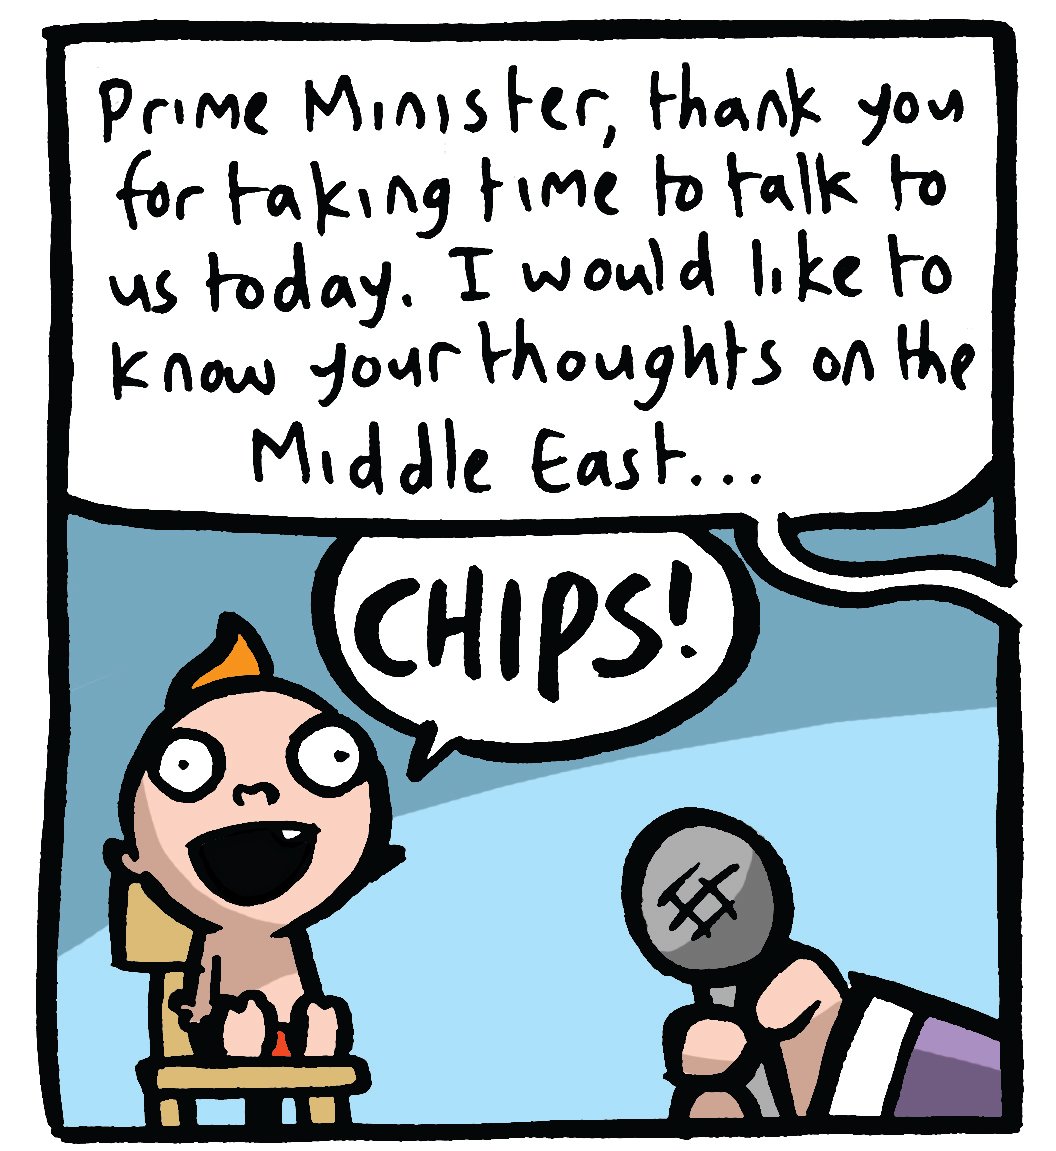 With our new Prime Minister!